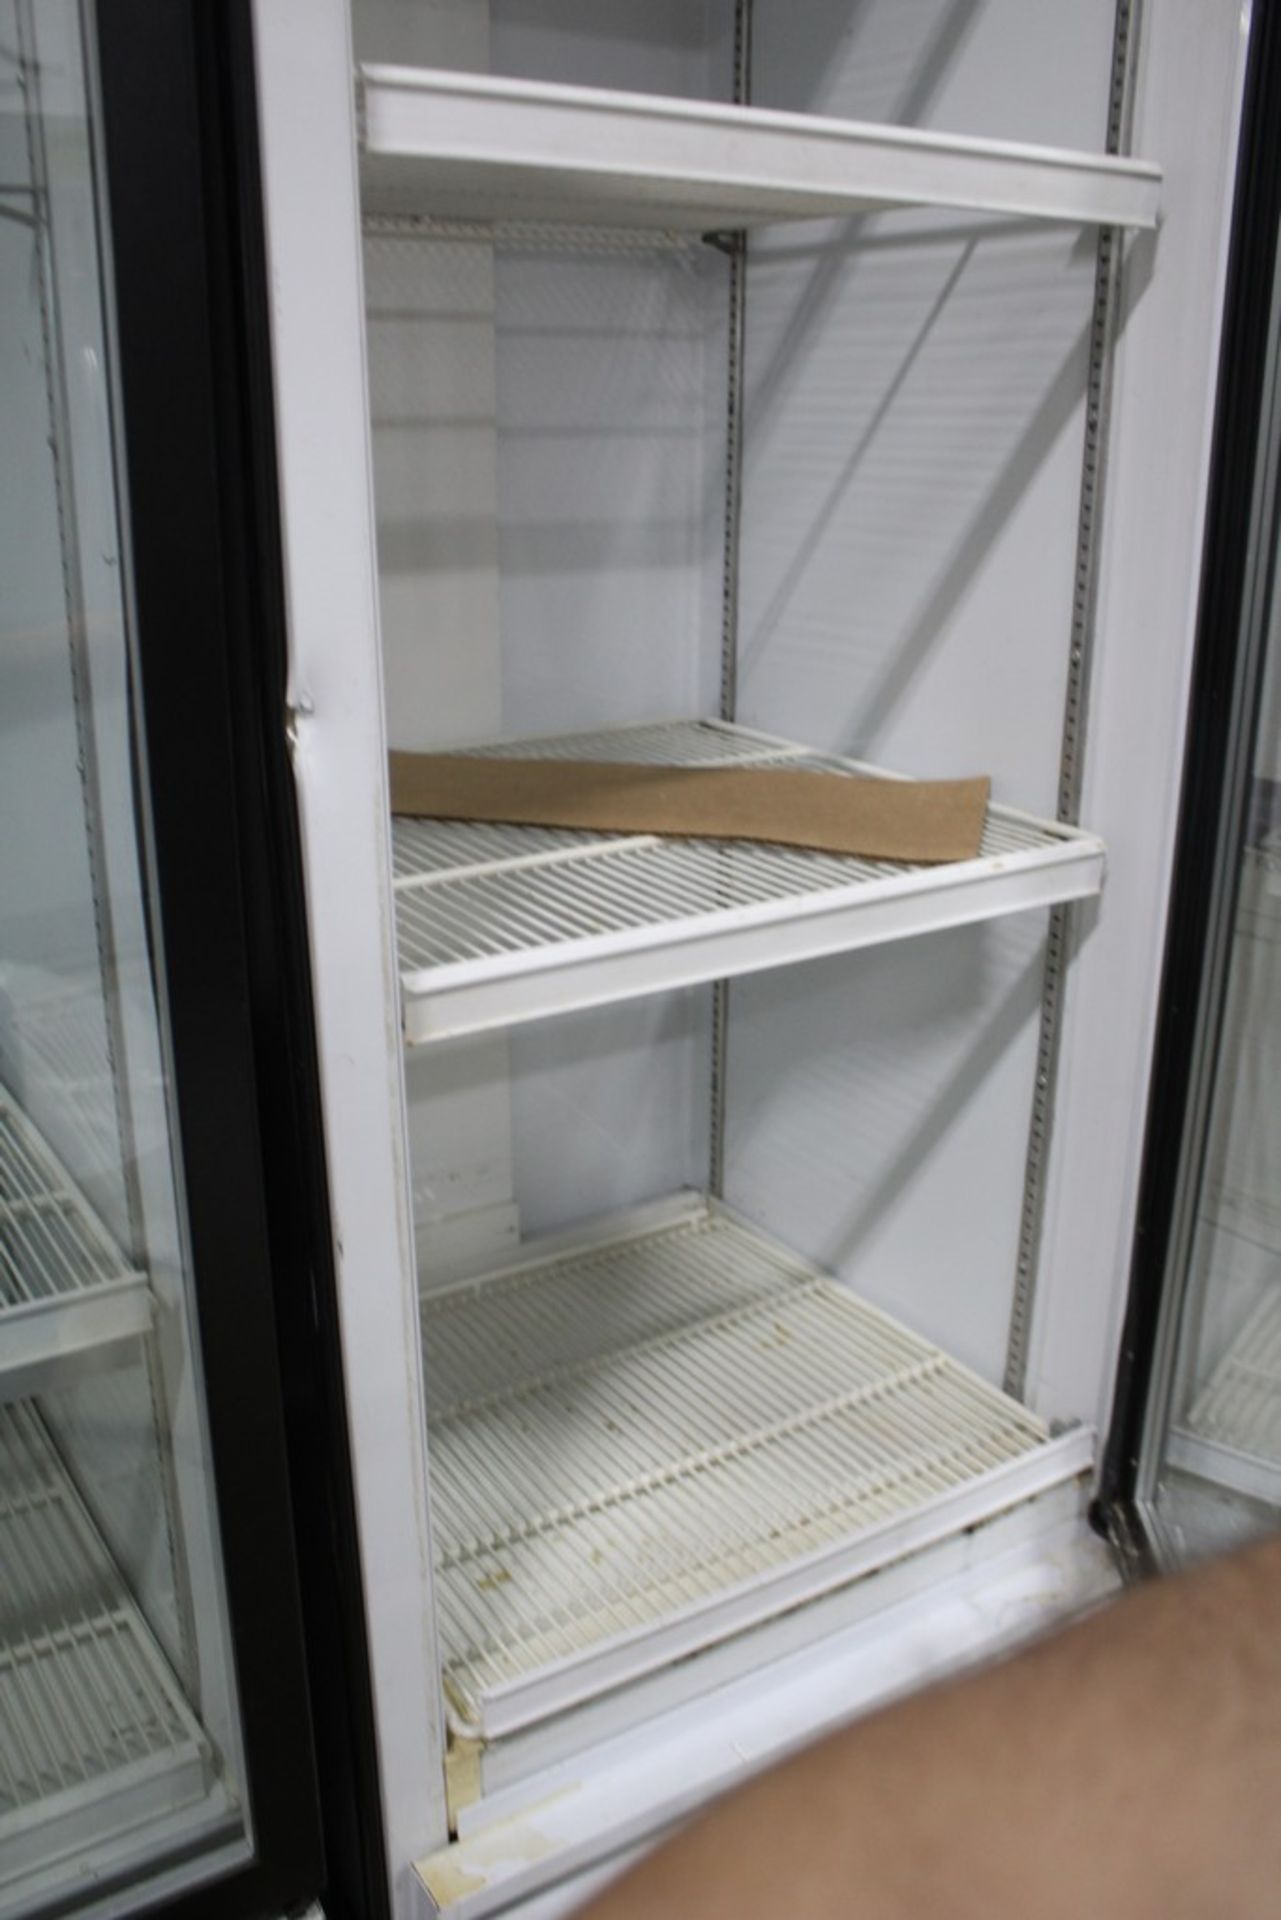 BEVERAGE-AIR MODEL MT19 REFRIGERATOR AND/OR FREEZER, S/N 5476999, 78" X 24" X 24" - Image 3 of 3